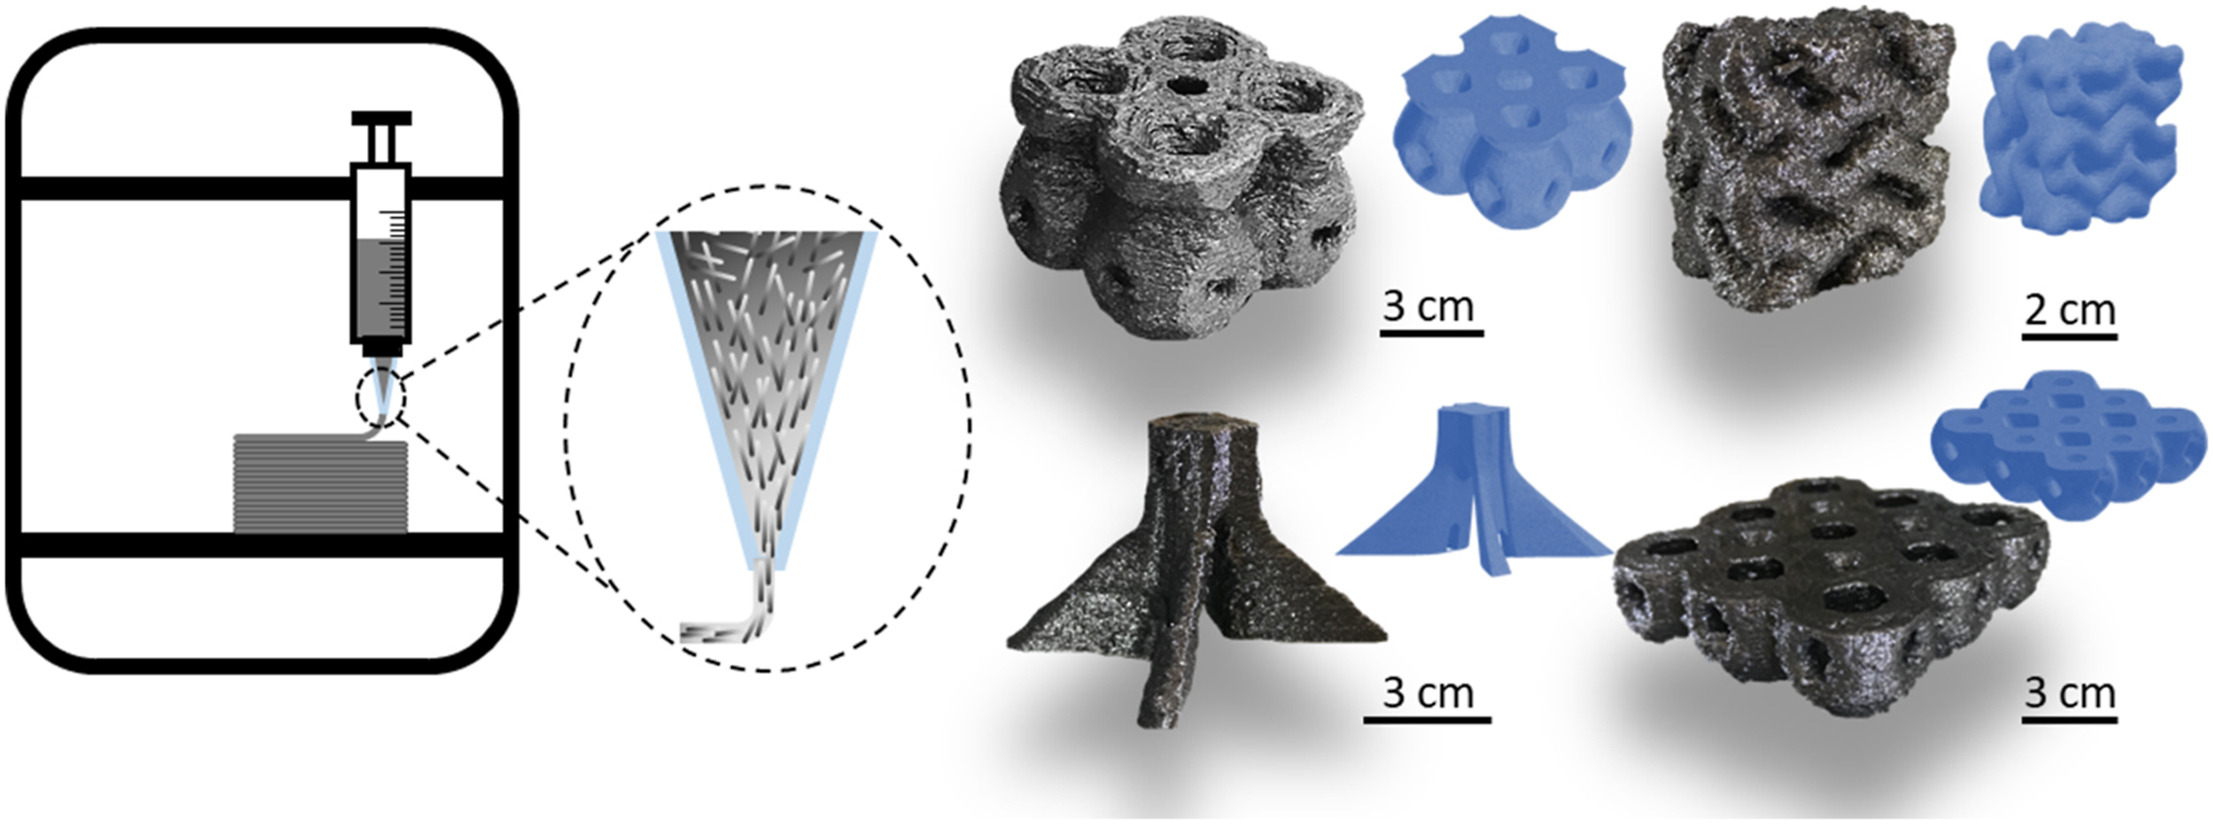 Scientists successful in 3D printing complex graphite parts with 97% purity - 3D Printing